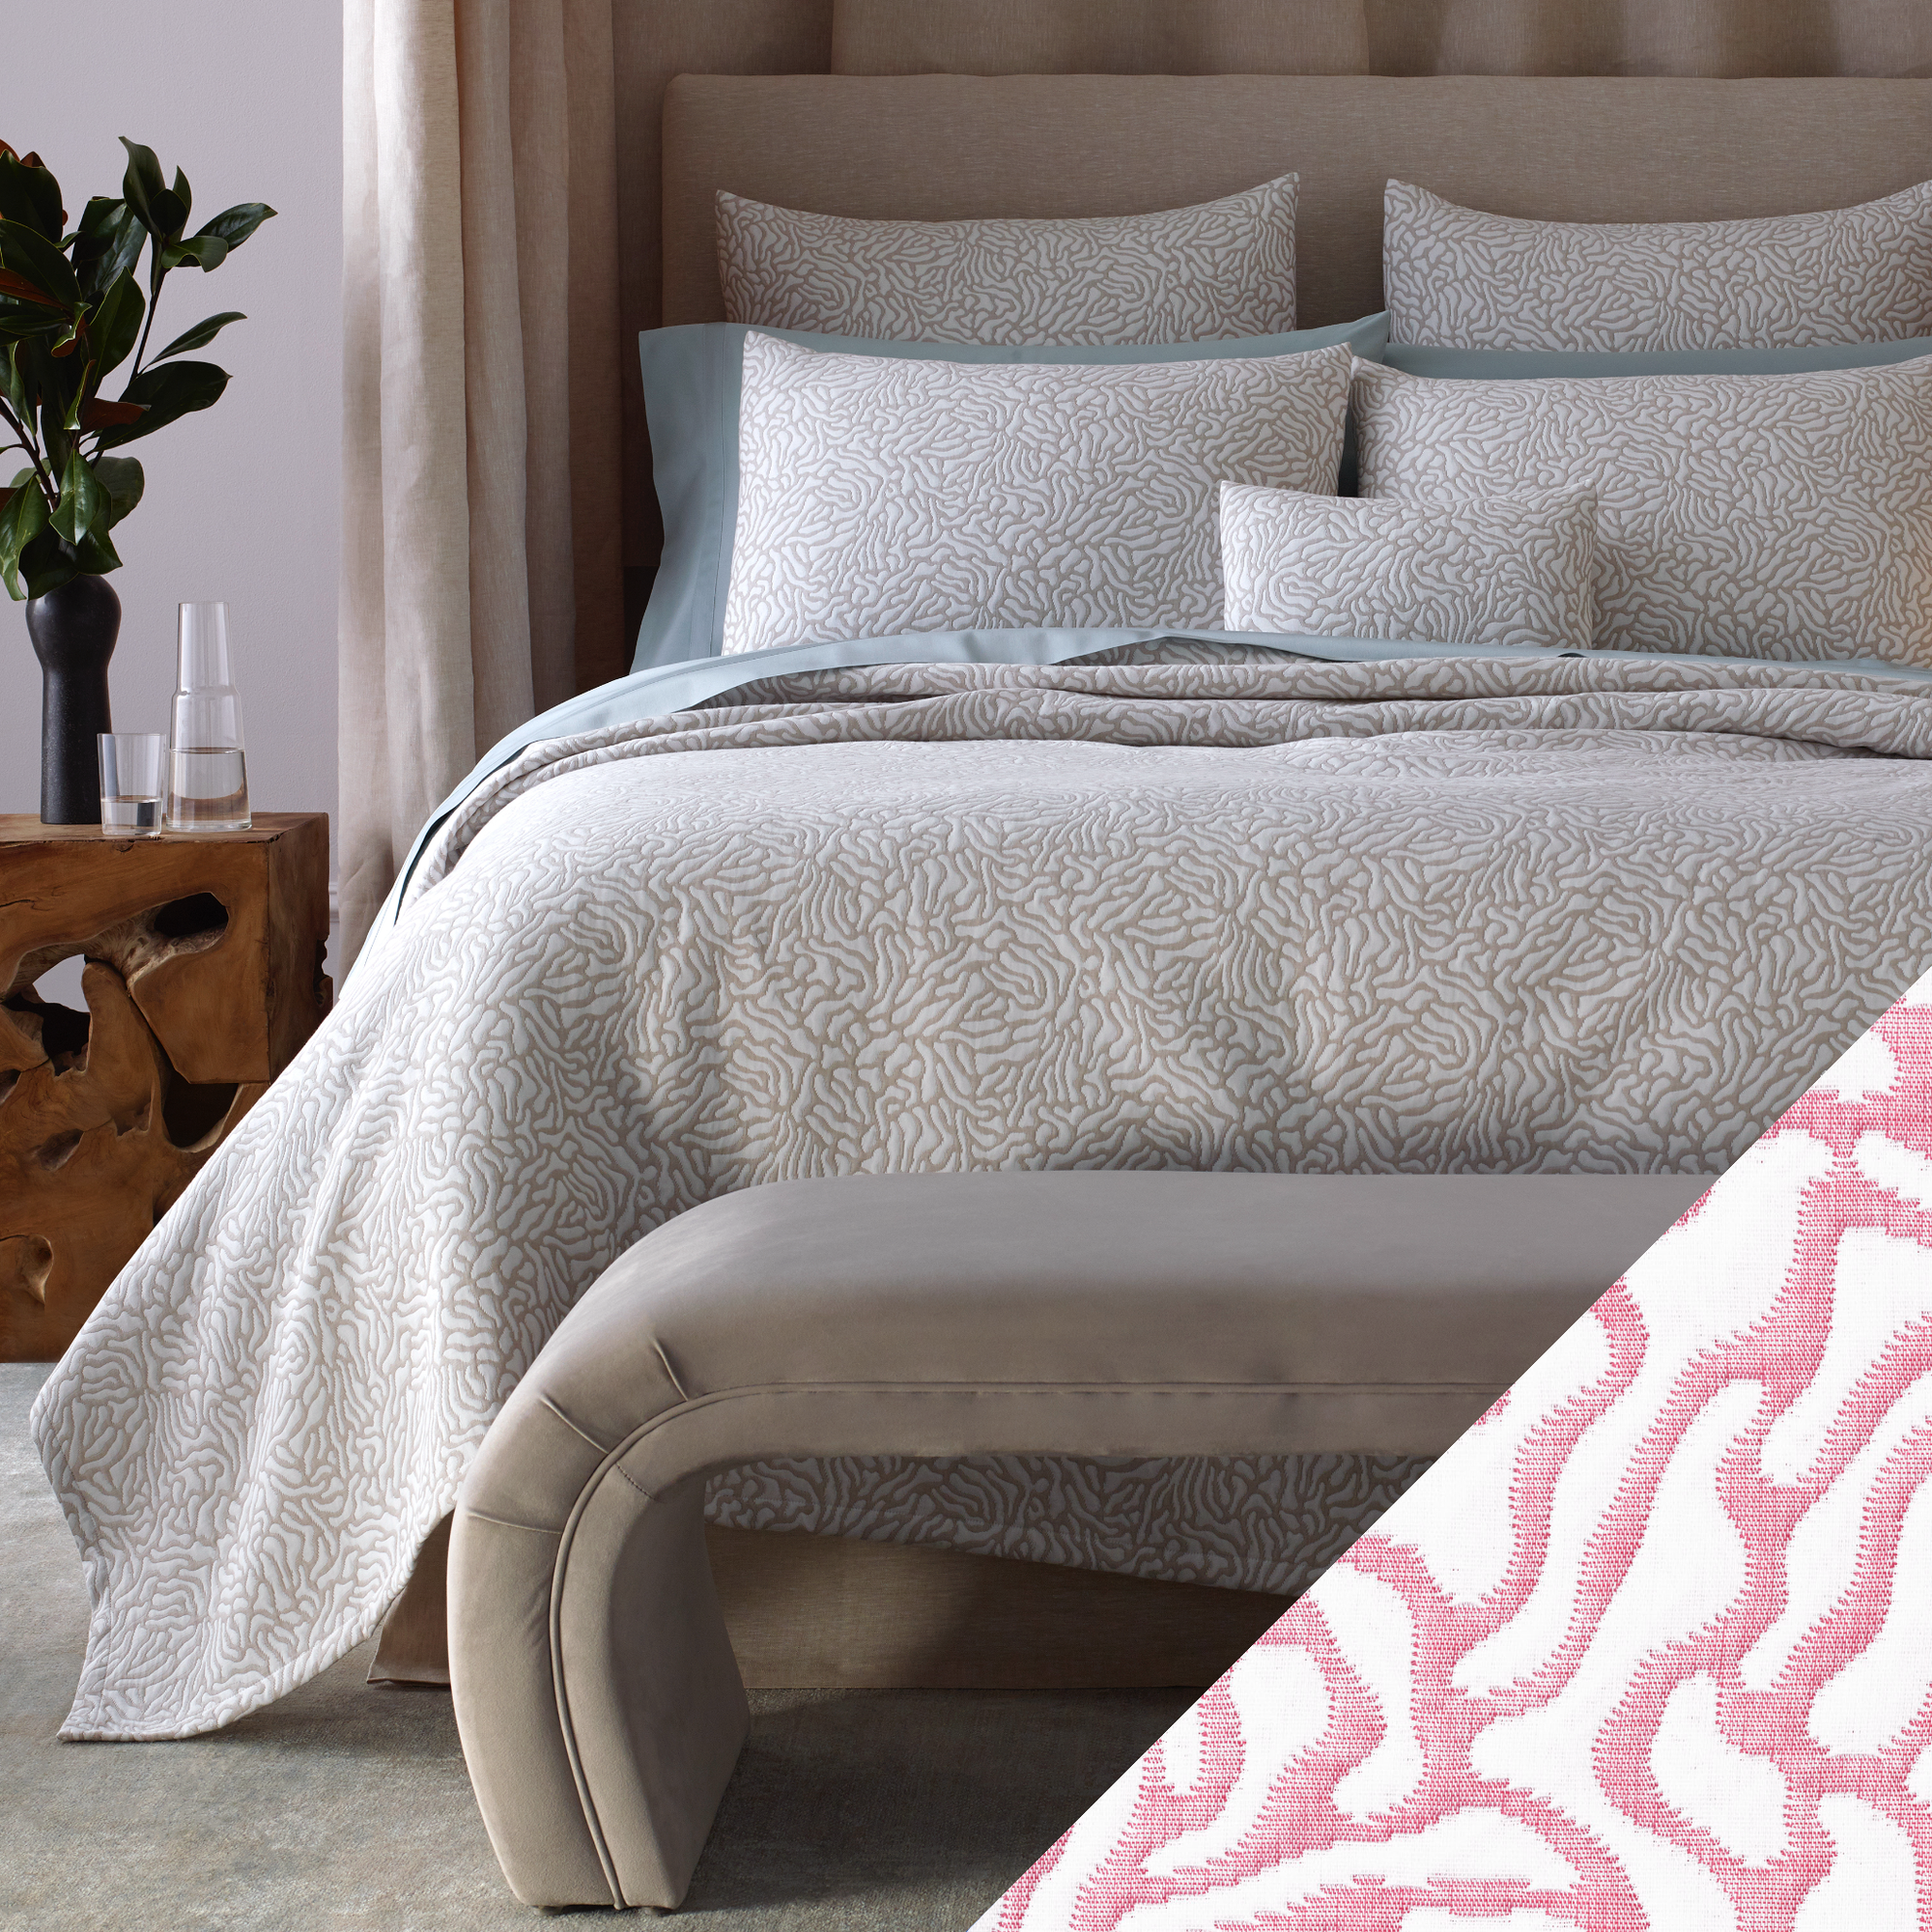 Full Bed Dressed in Matouk Schumacher Cora Bedding in Natural White Color with Peony Swatch